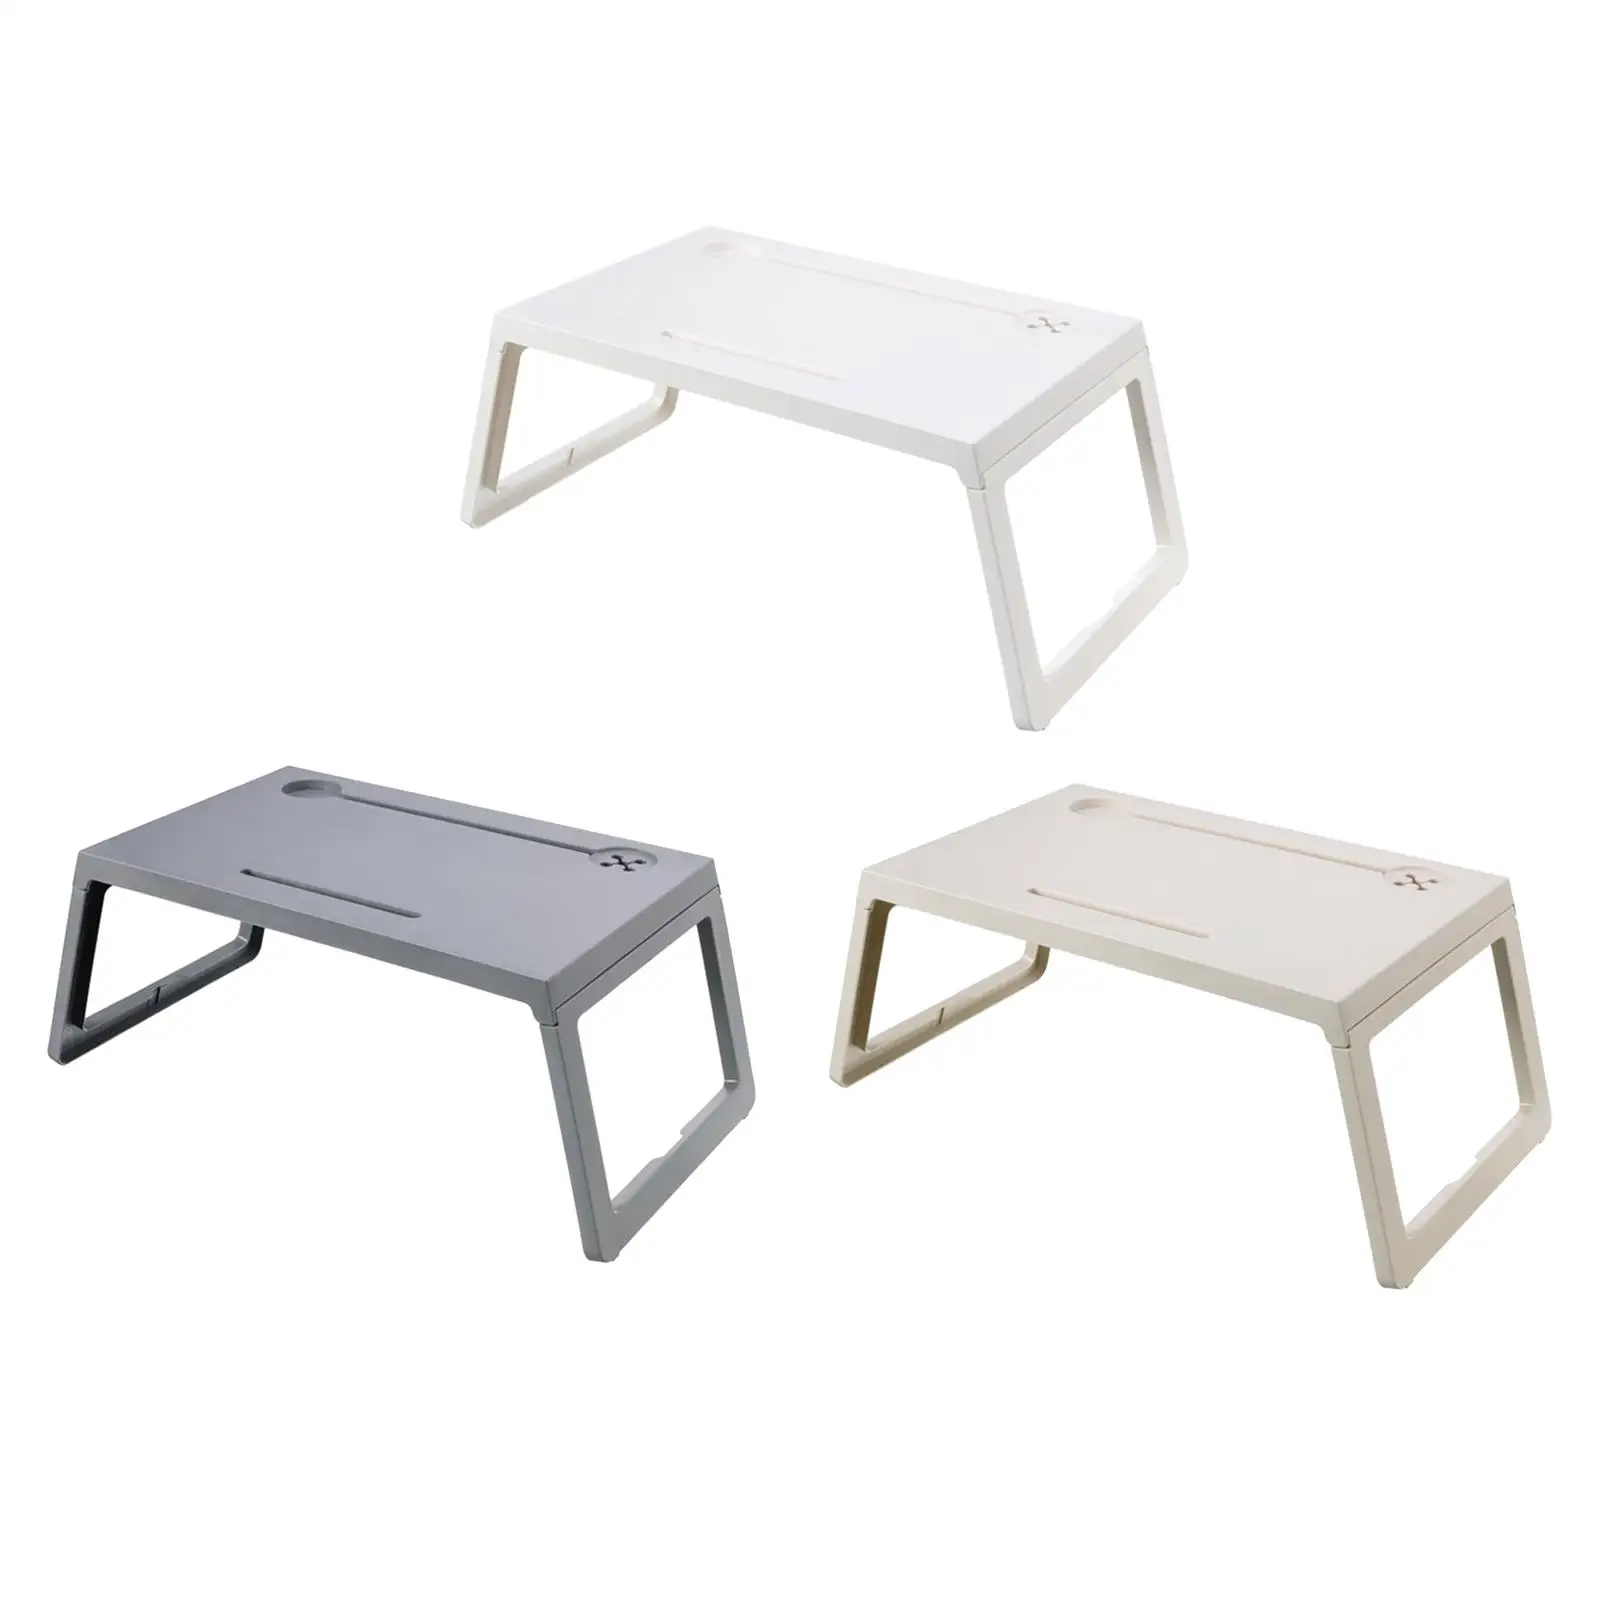 Foldable Laptop Table Breakfast Tray lap Tray Table Serving Bed Tray Bed Stand for Lawn Bed Reading Watching Floor Table